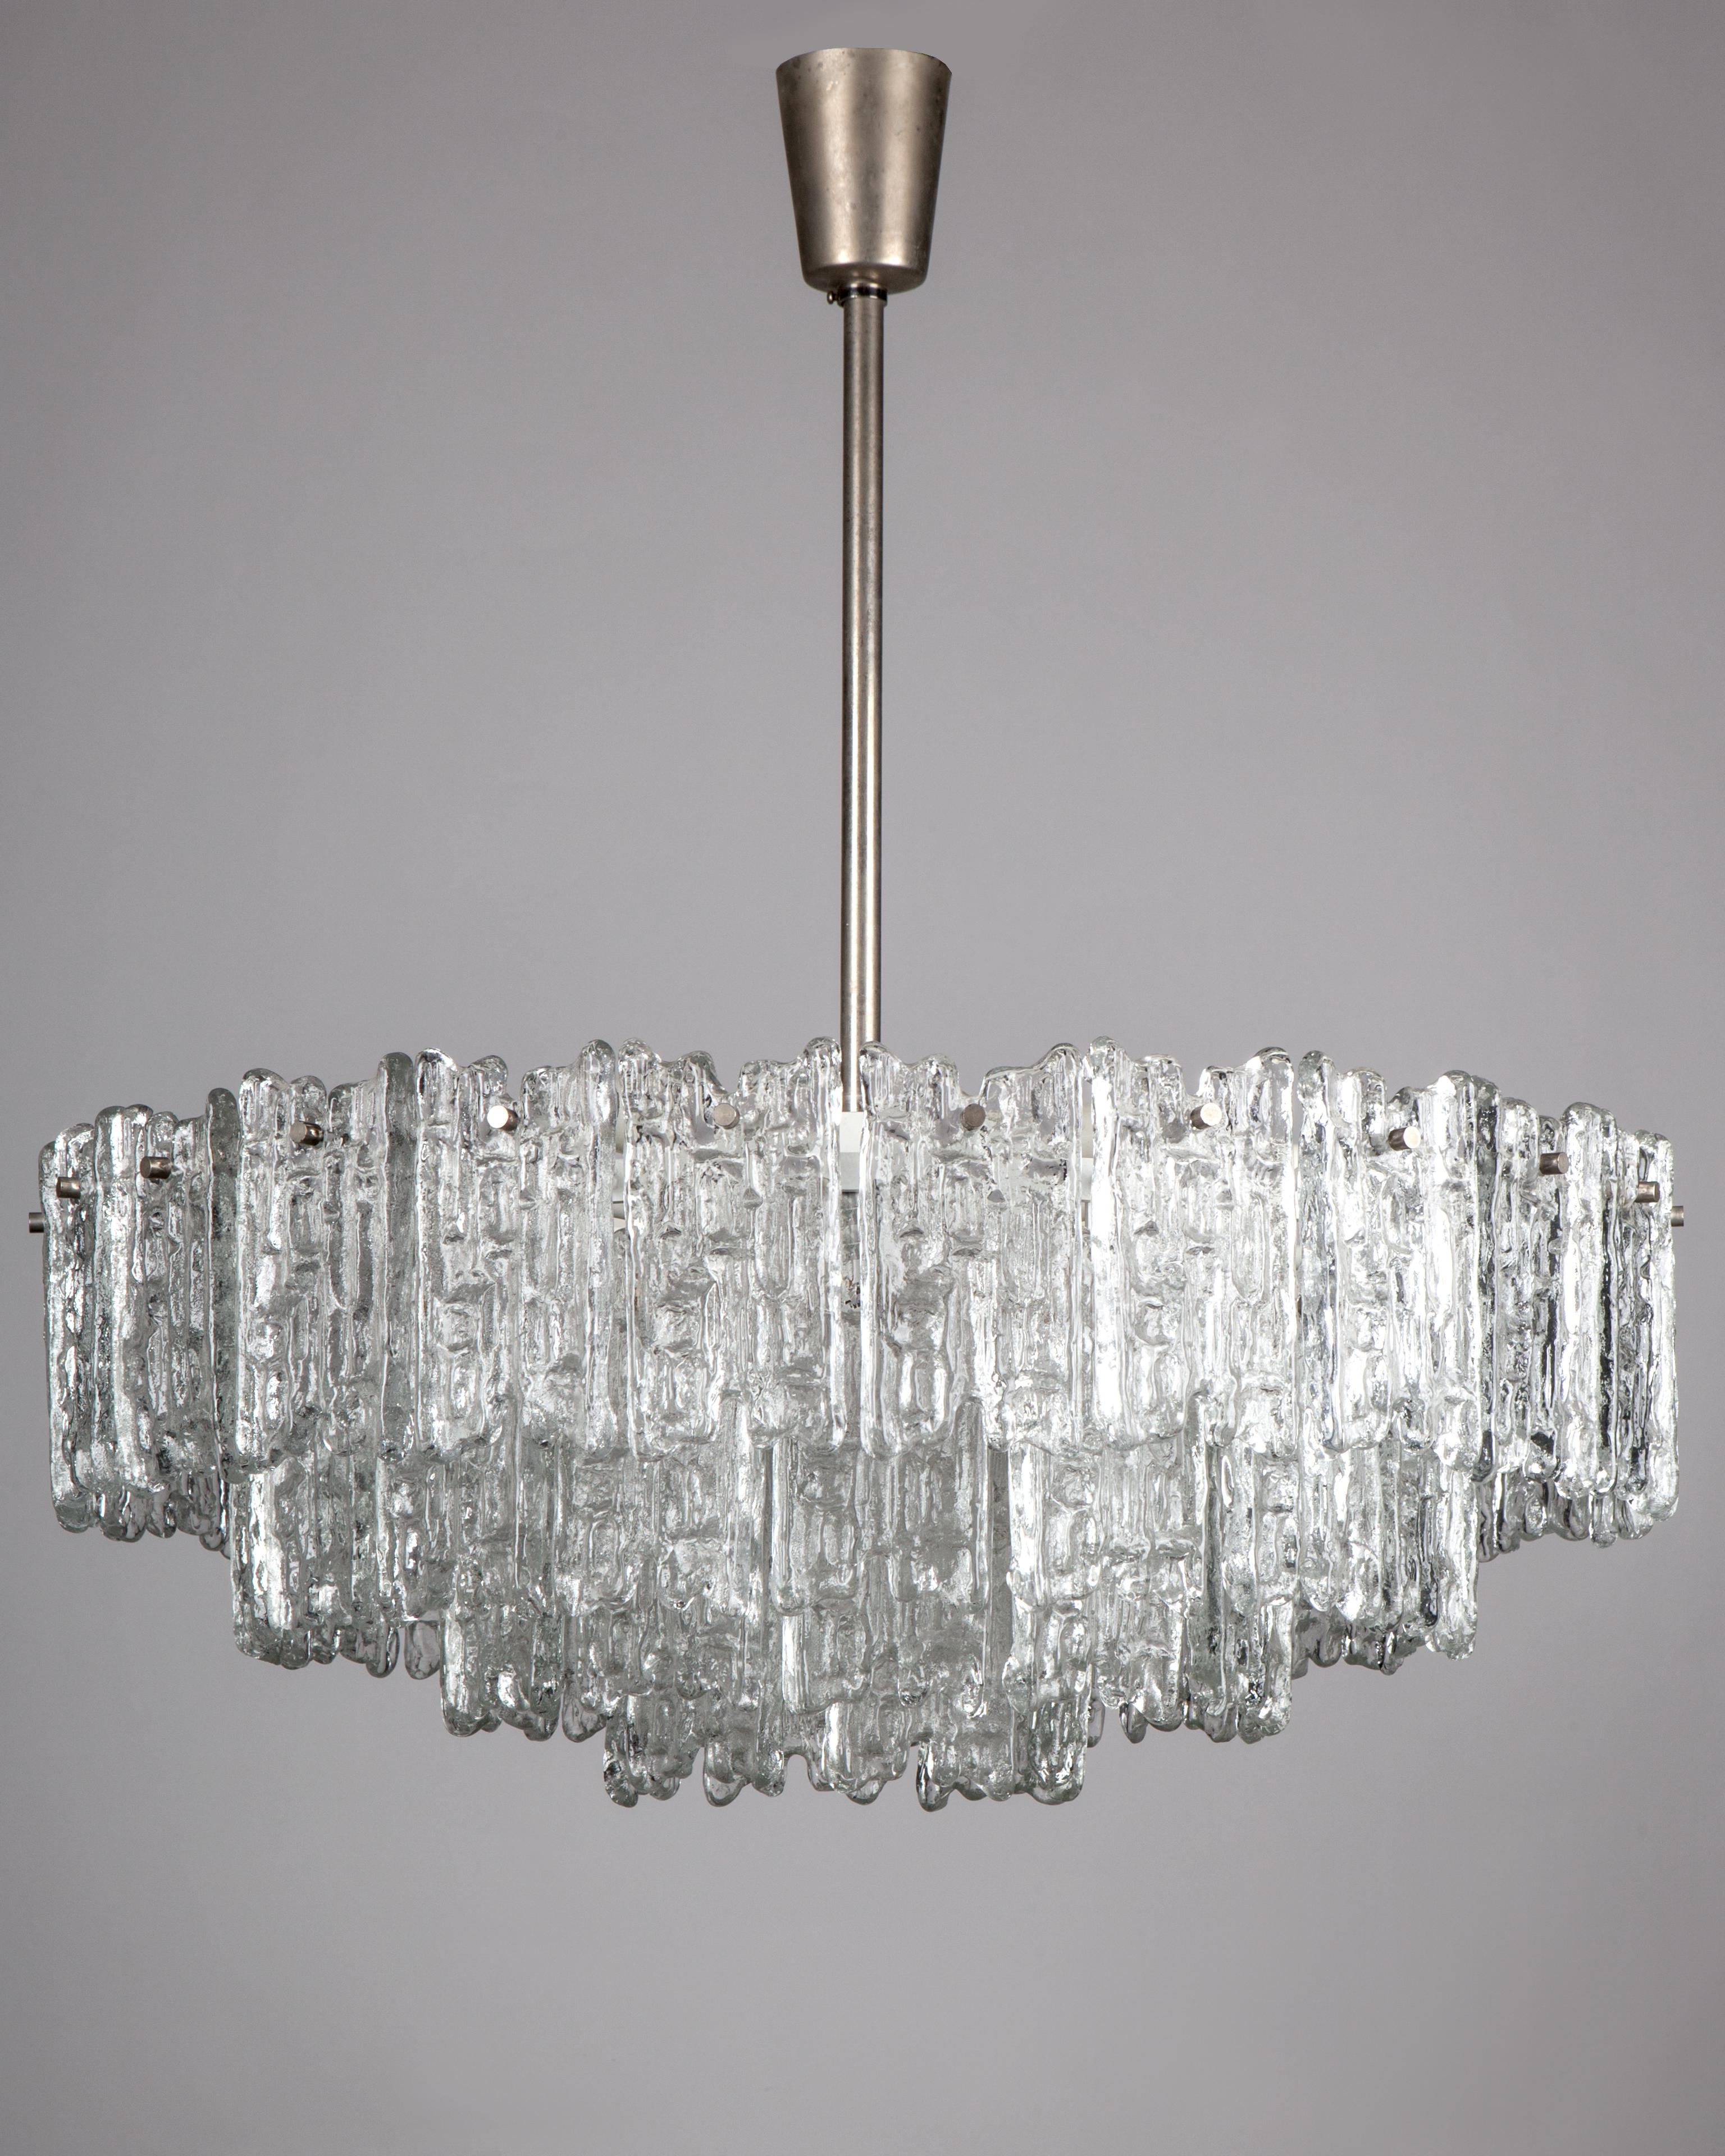 AHL3951
A large vintage chandelier with deeply textured glass tiles and aged nickel metalwork designed by the Austrian maker Kalmar. Due to the antique nature of this fixture, there may be some nicks or imperfections in the